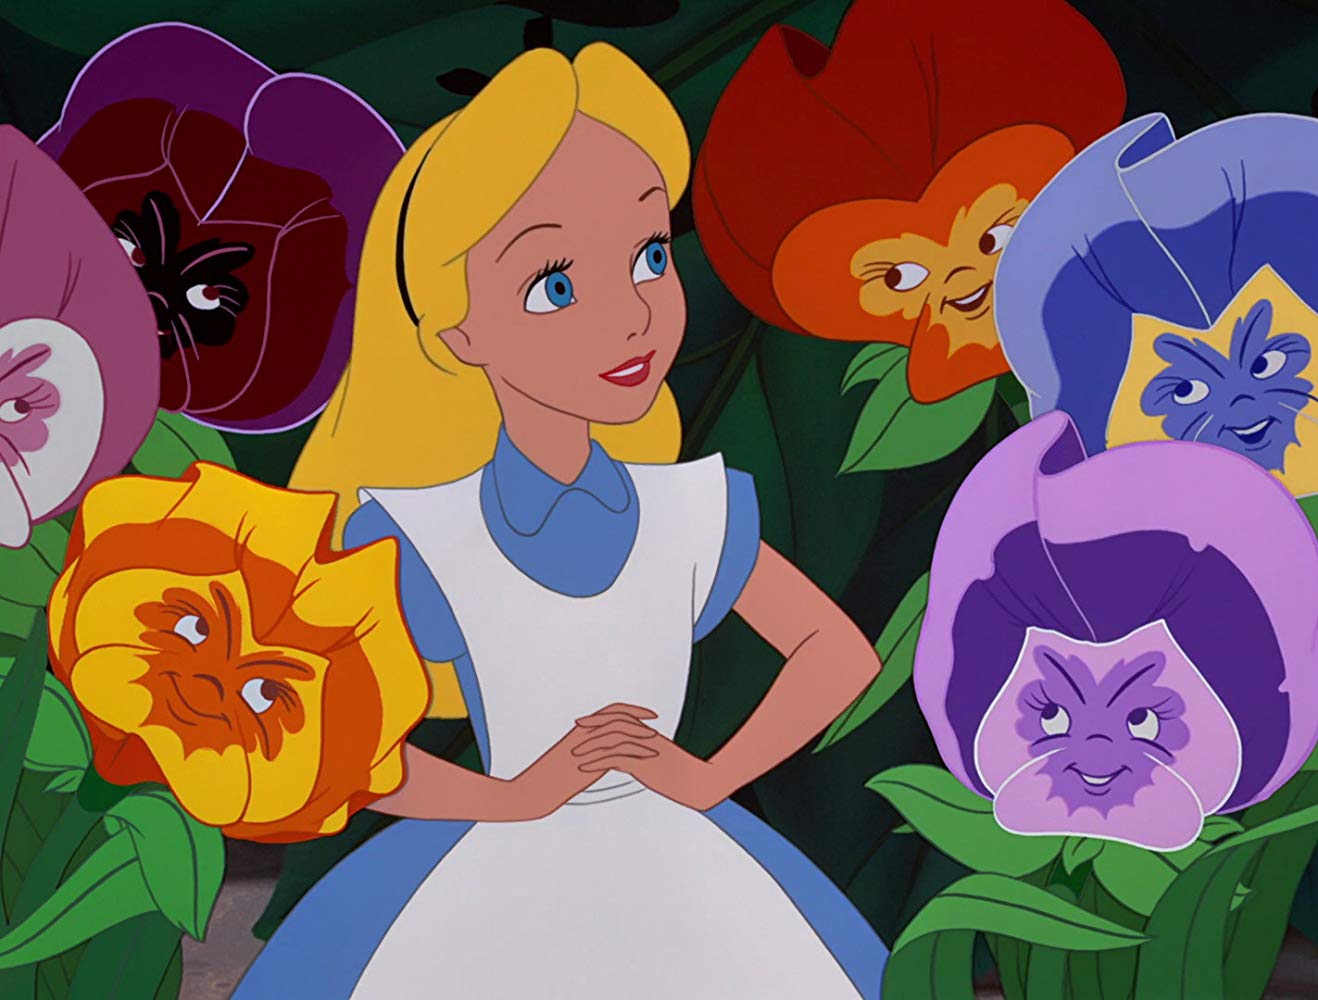 85% Of People Can’t Get 12/15 on This Easy General Knowledge Quiz. Can You? Alice in Wonderland